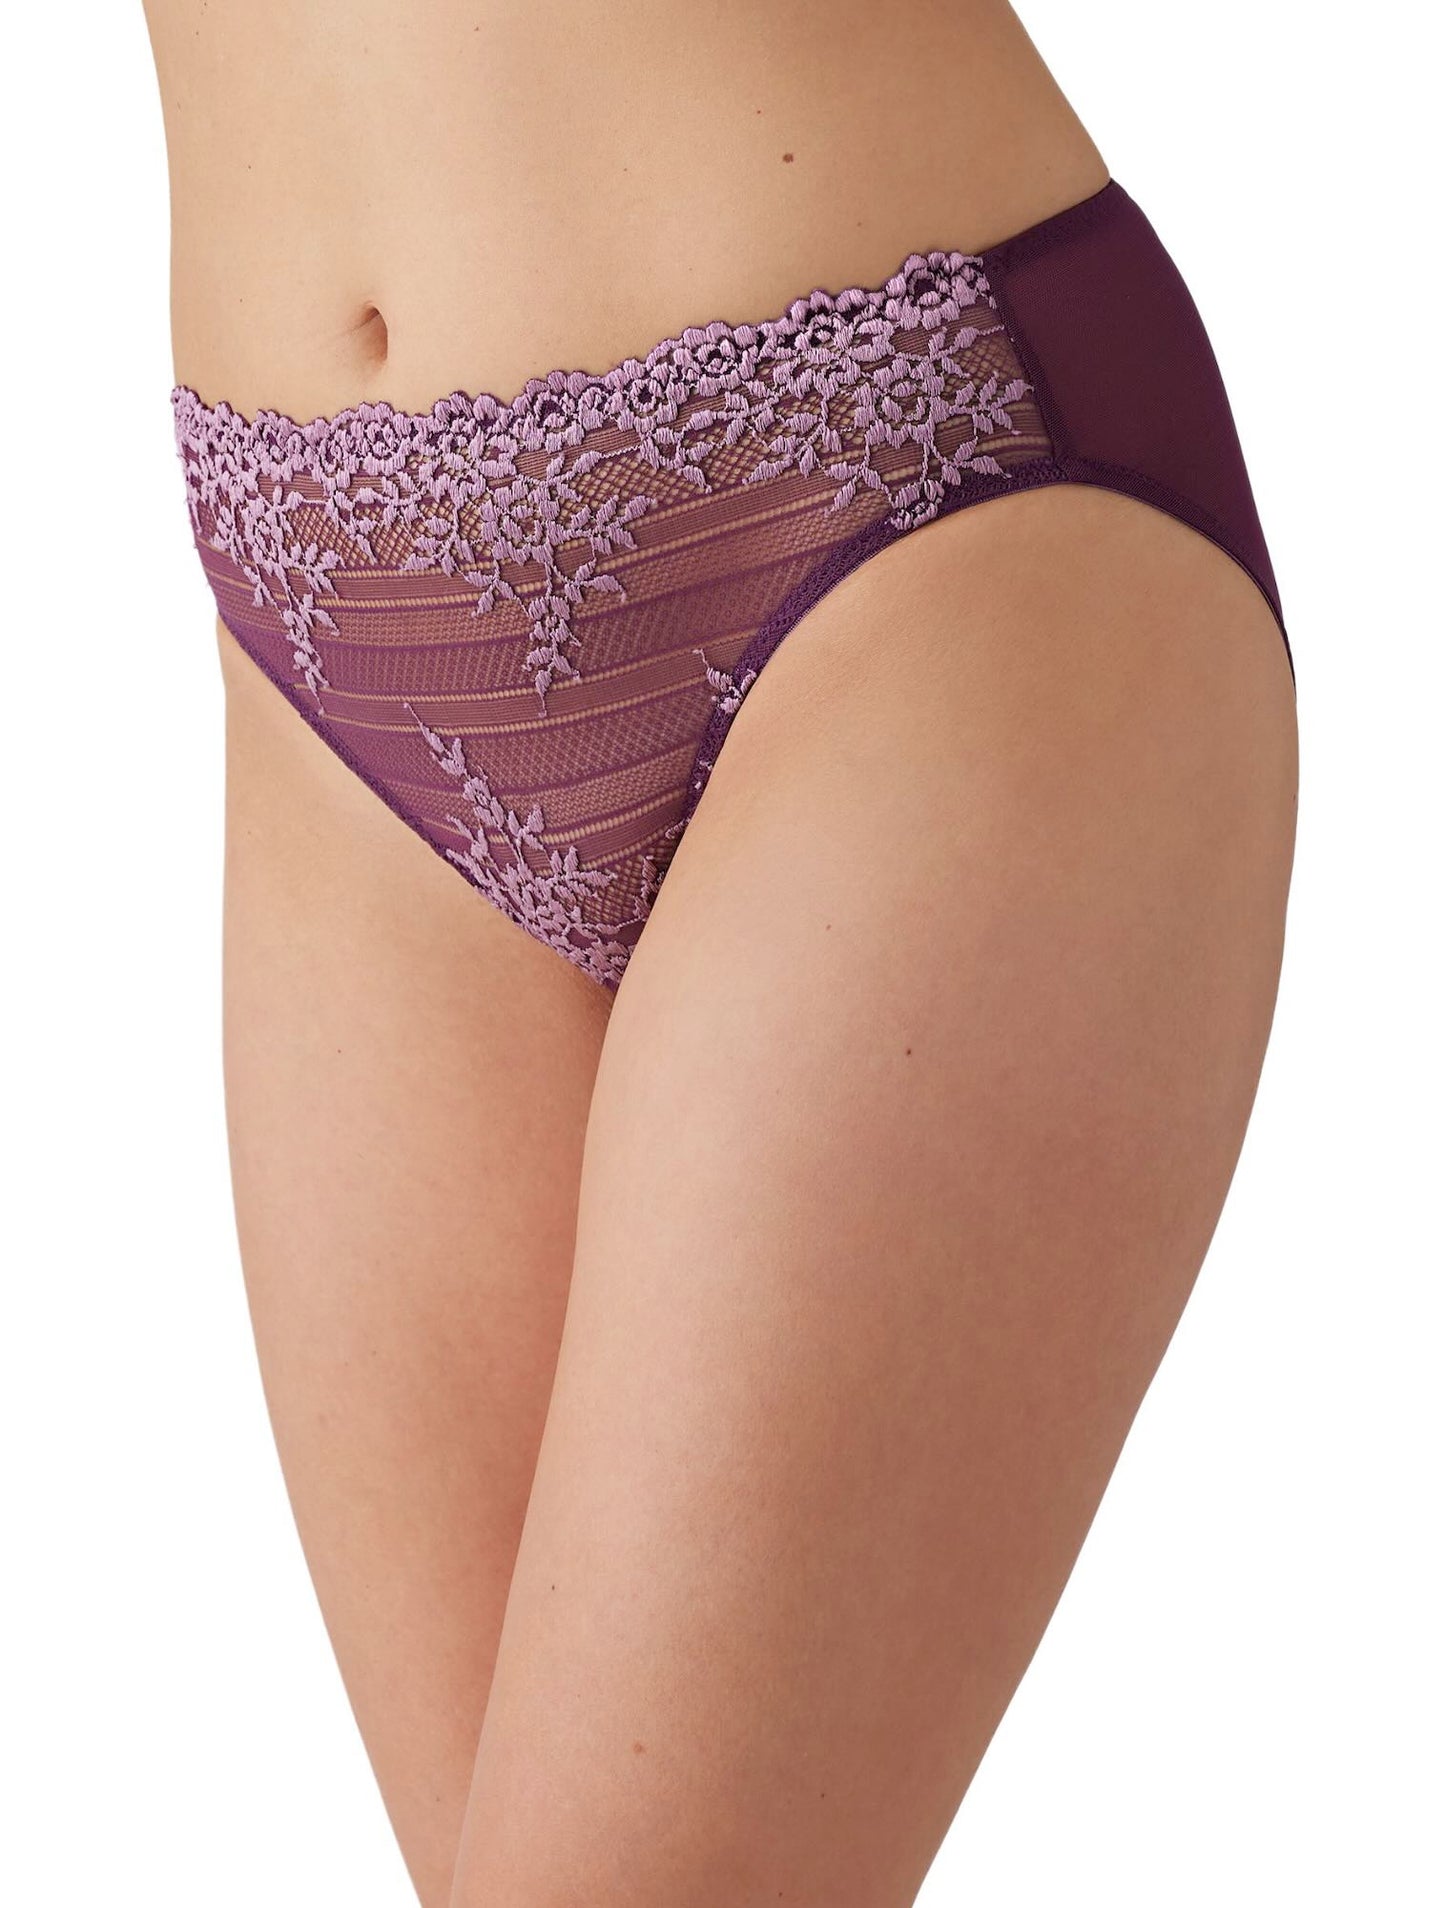 Embrace Lace high cut brief - fall color